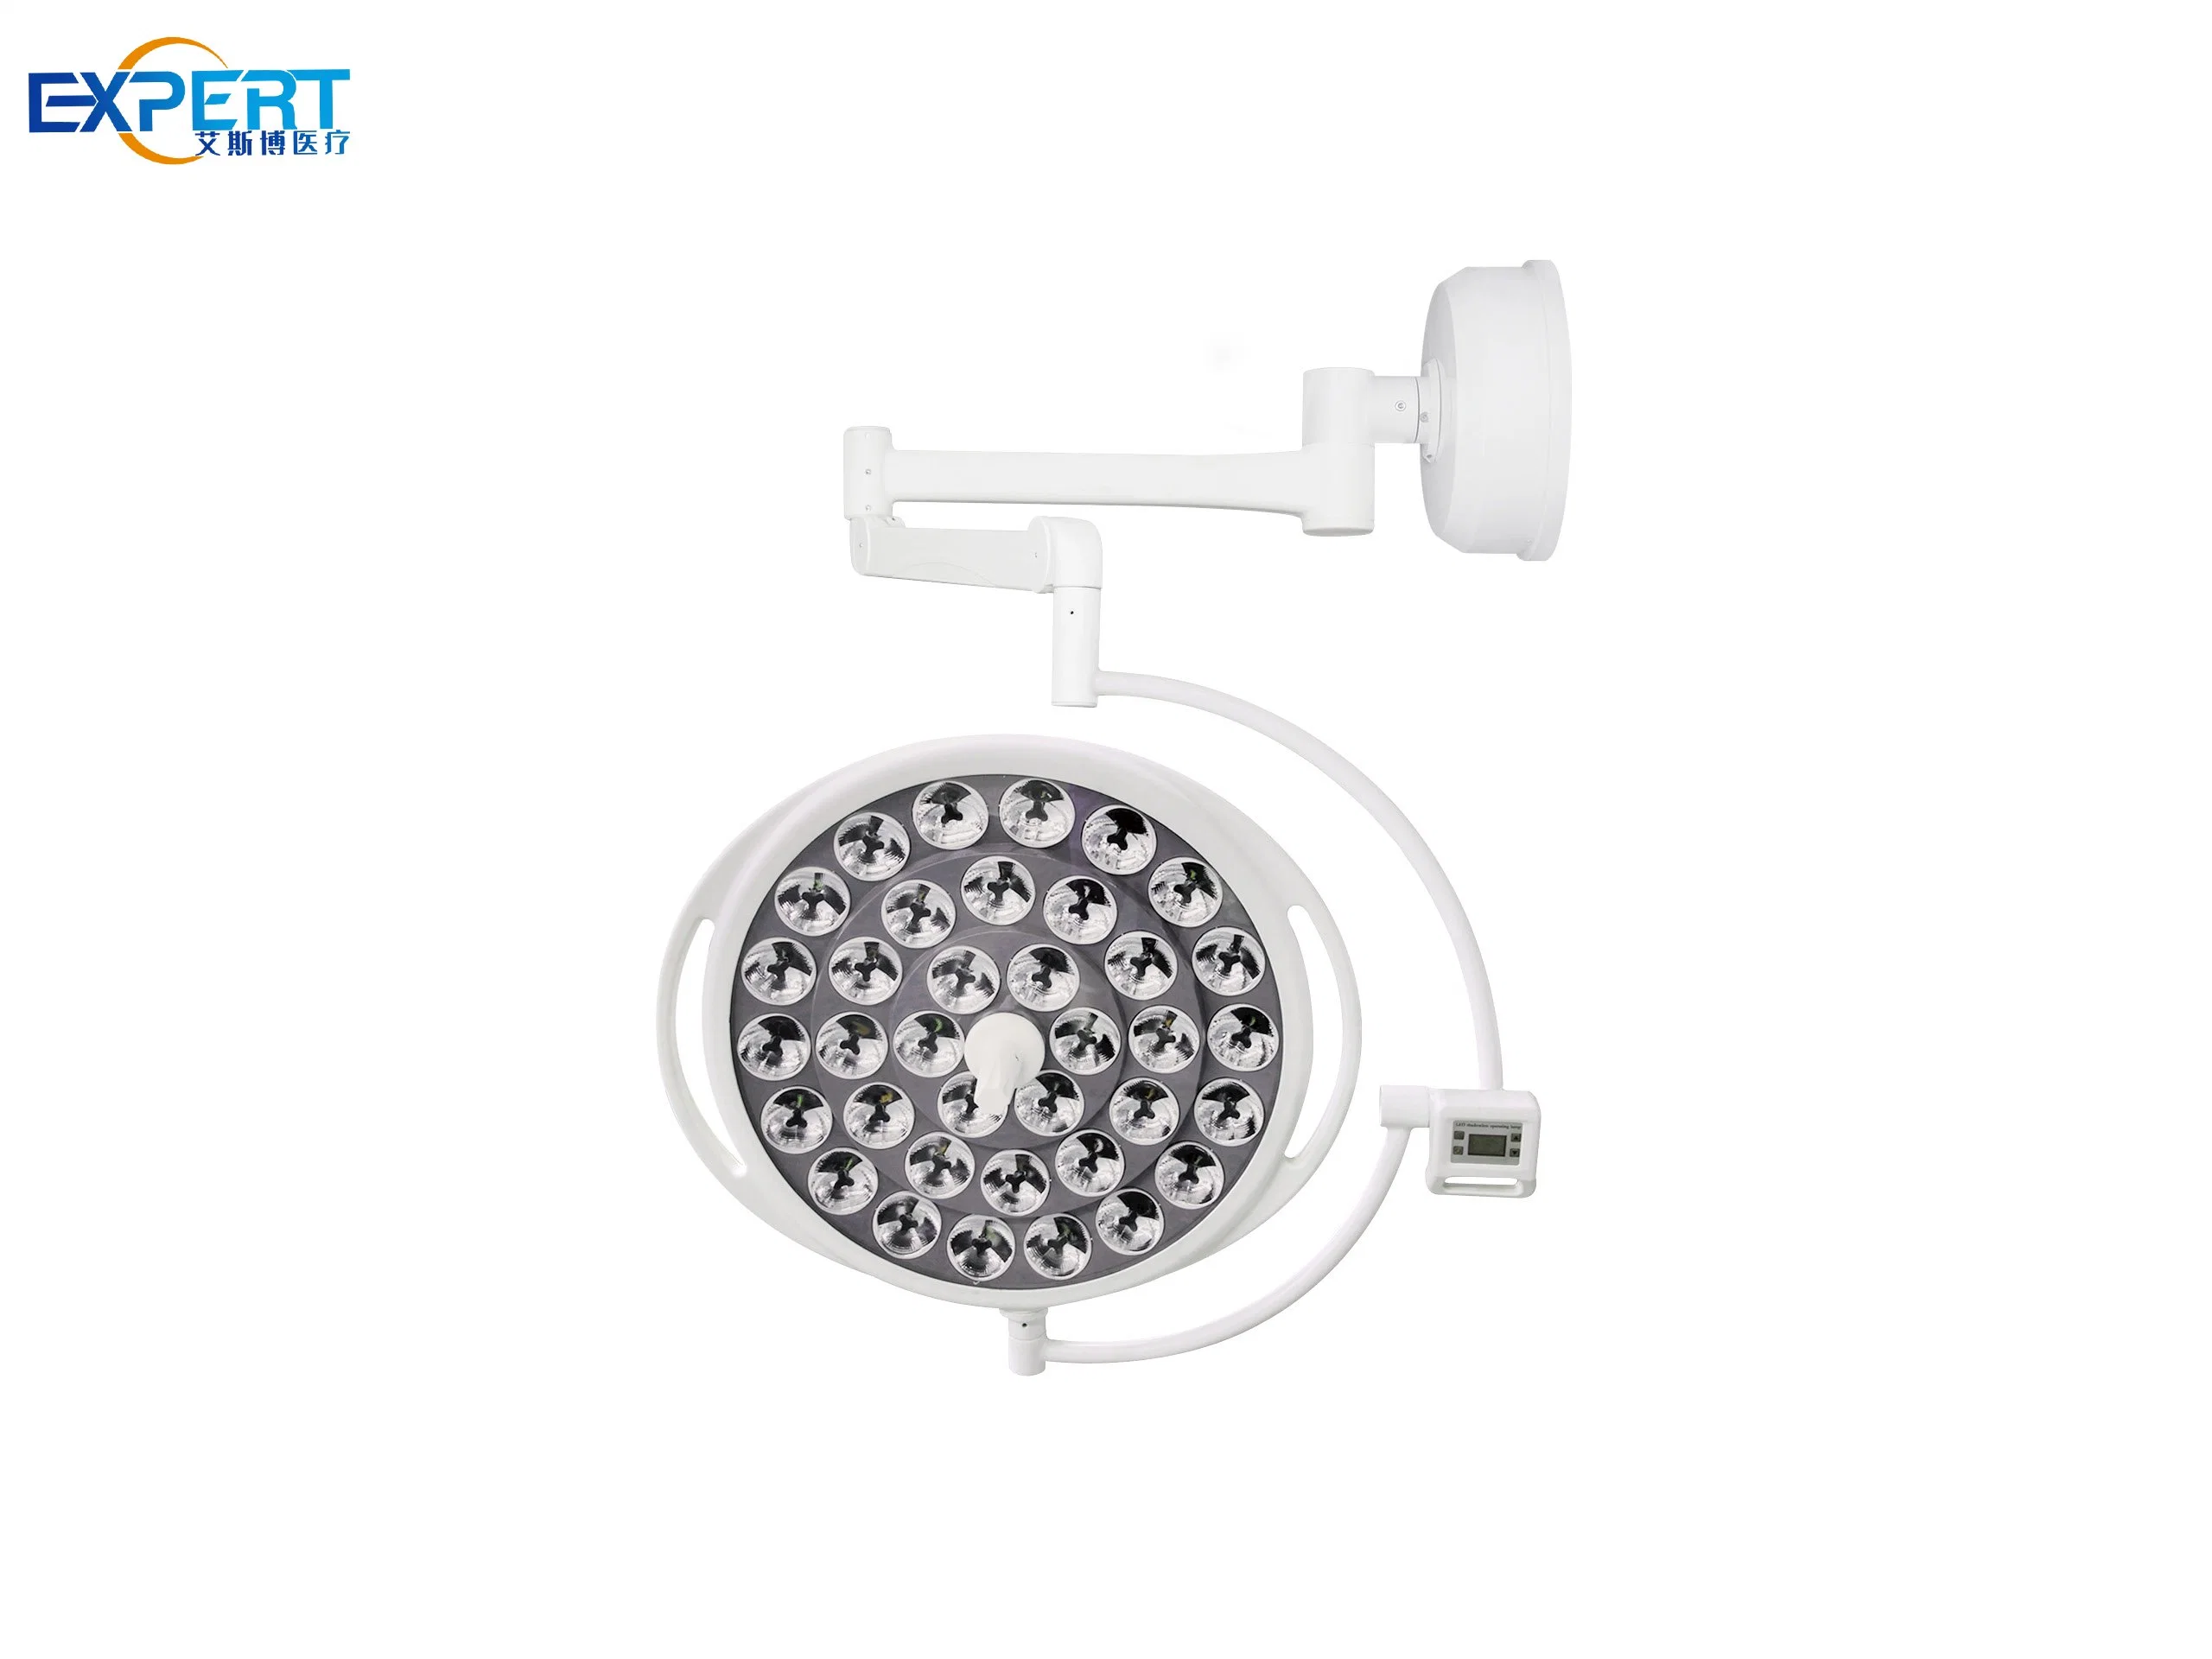 Latest Surgical Light LED Surgical Shadowless Operating Light Operation Lamp